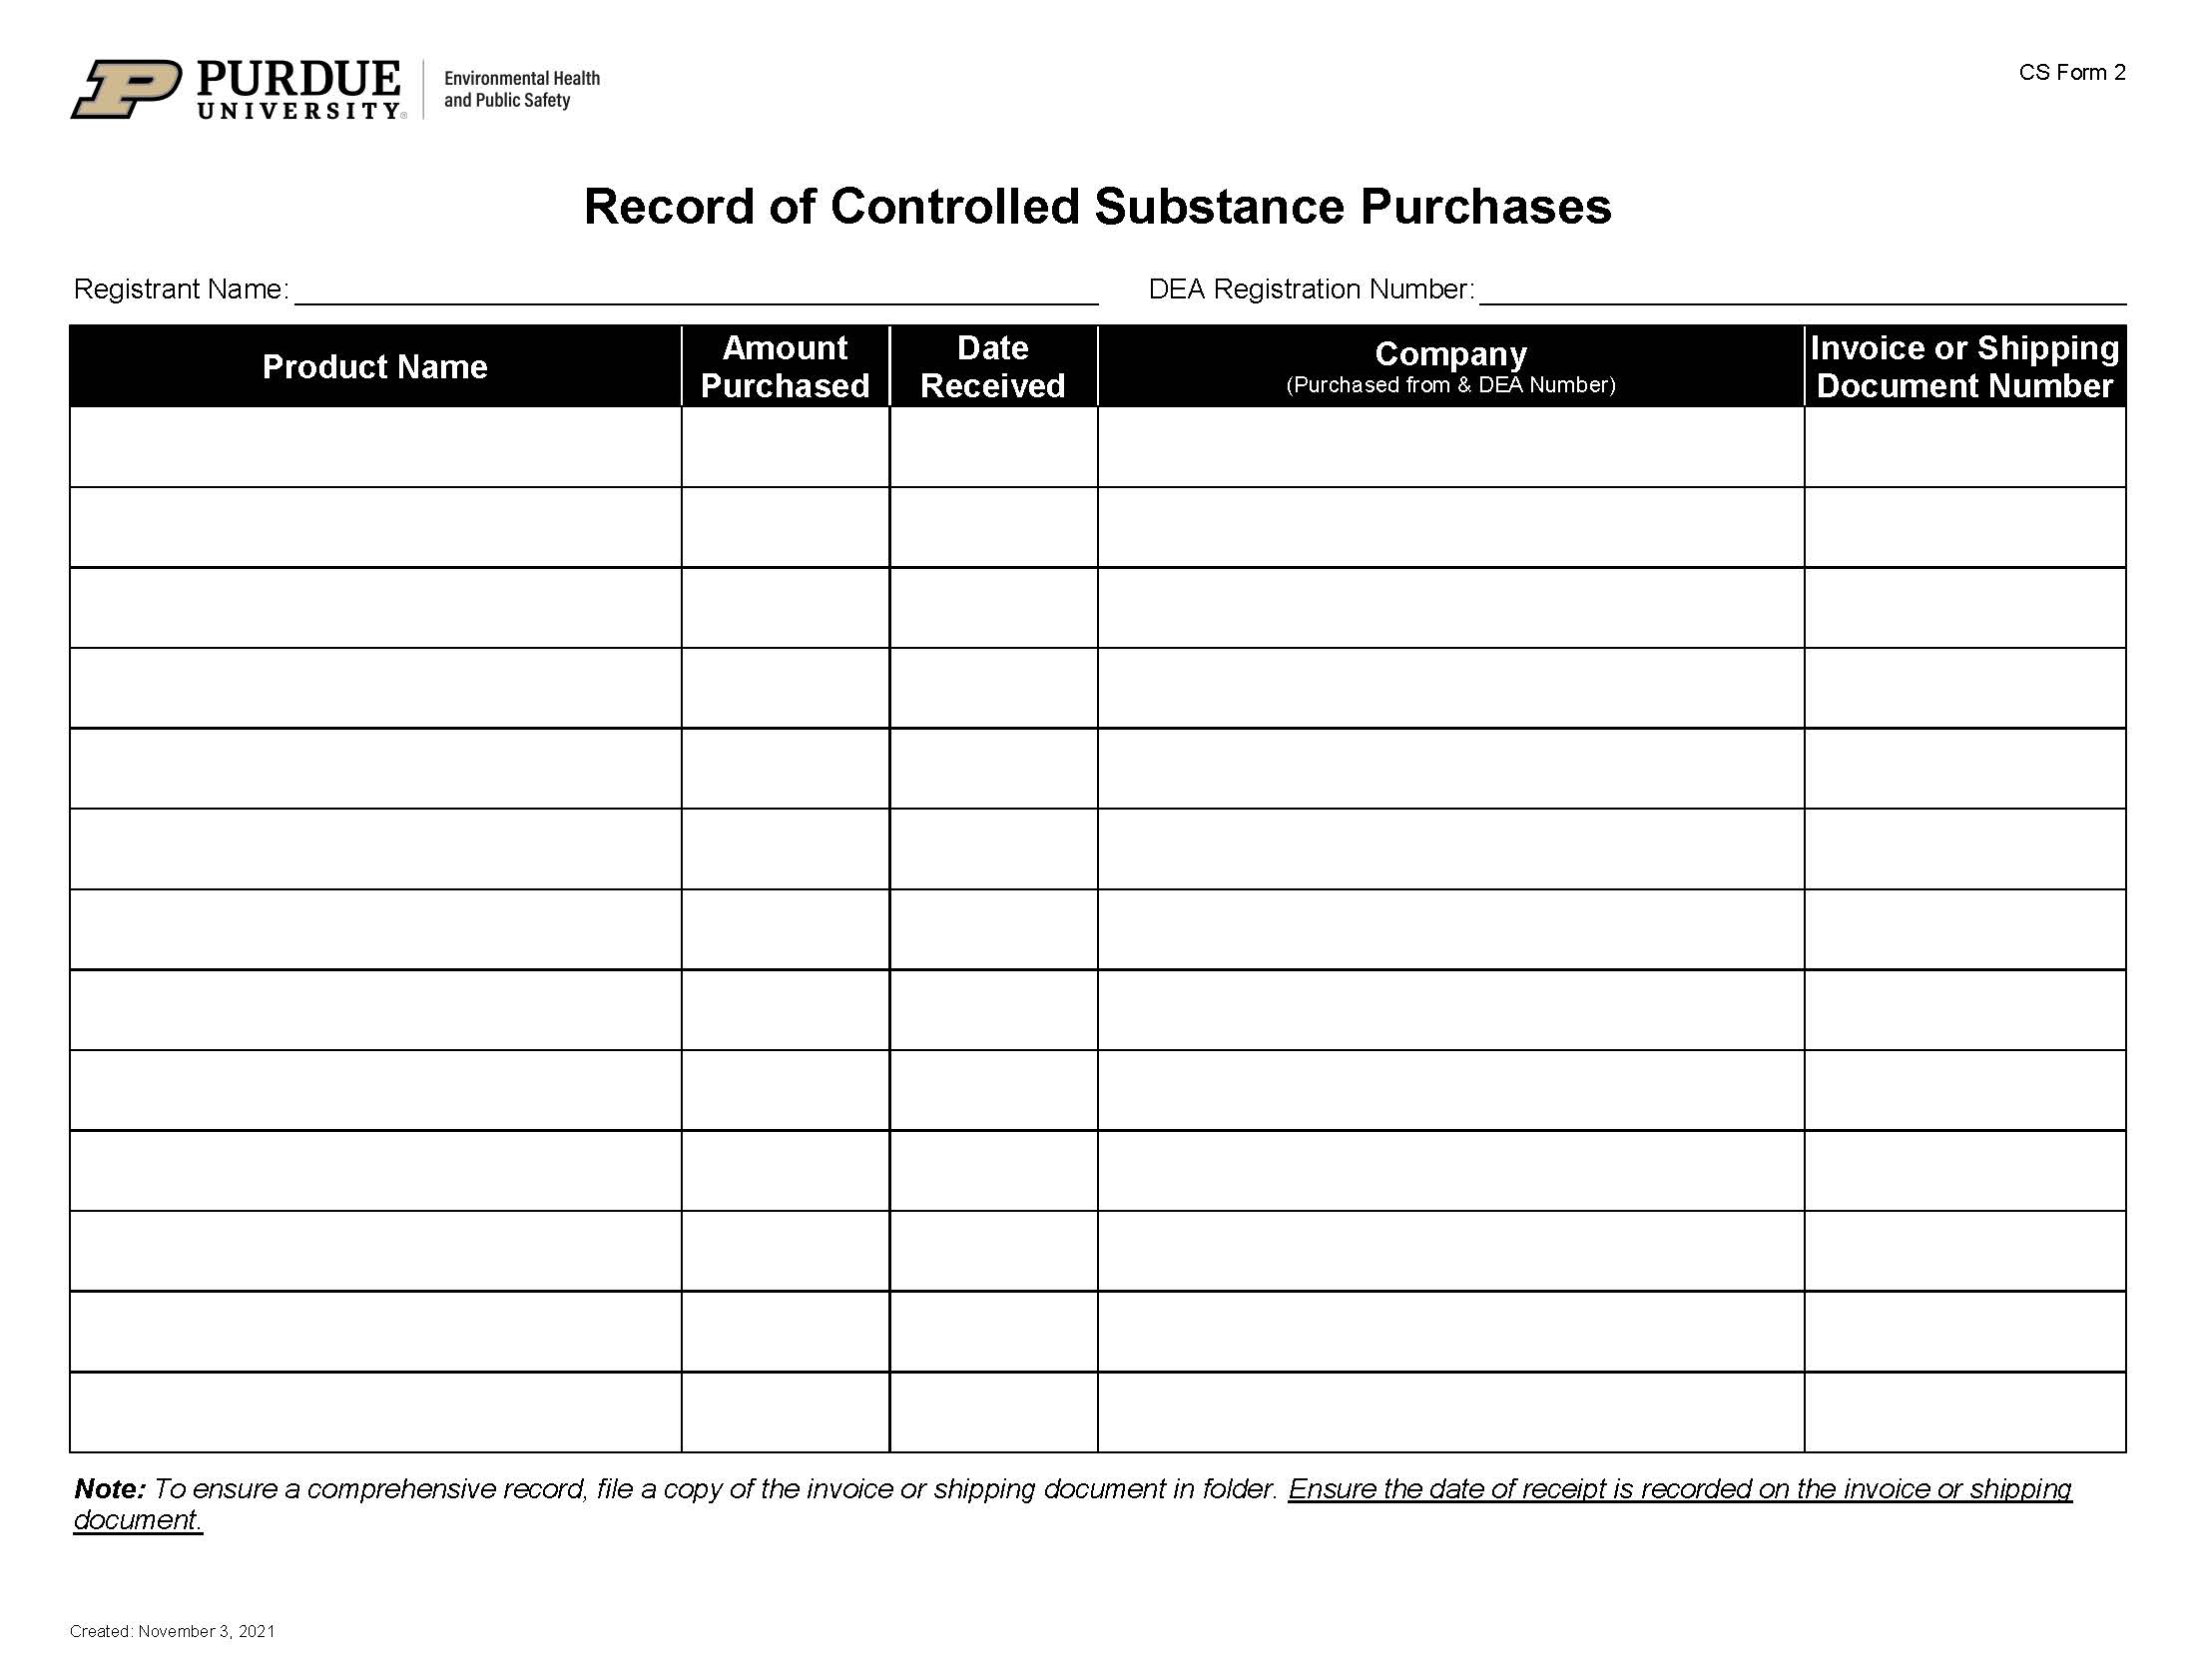 clickable link to controlled substance purchases form